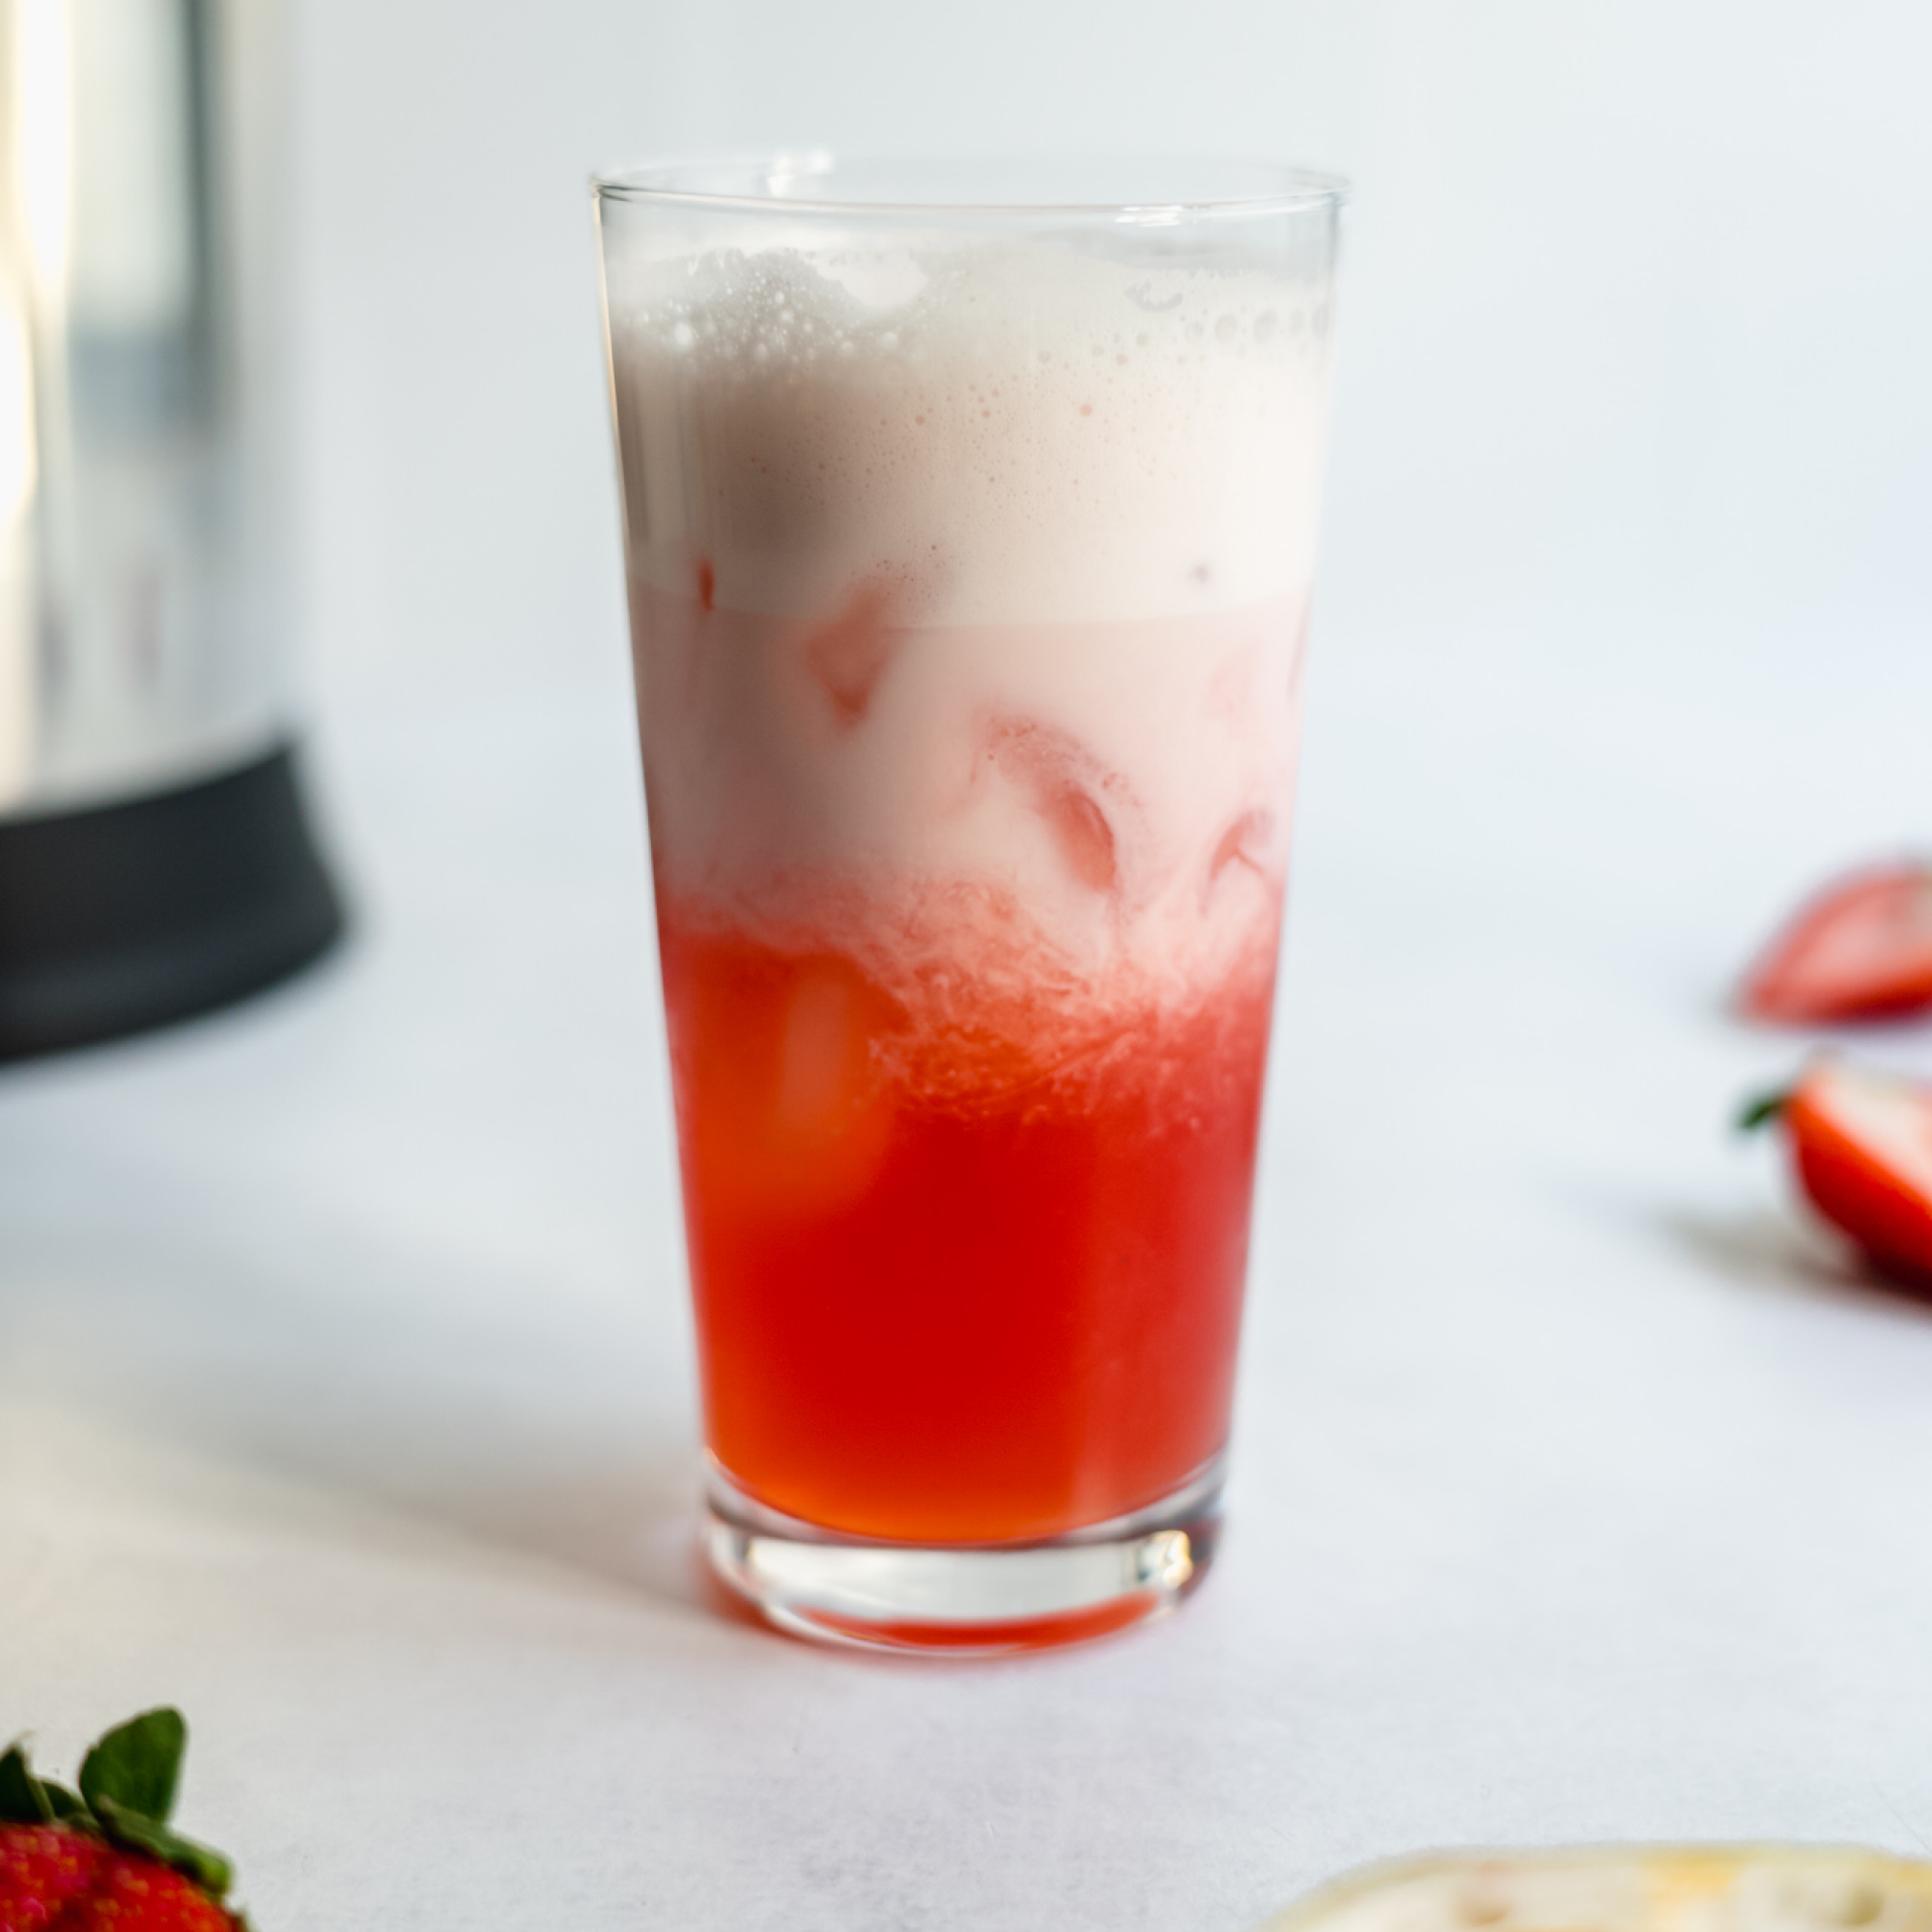 Delicious and easy-to-make Lovestruck Refresher using Almond Cow